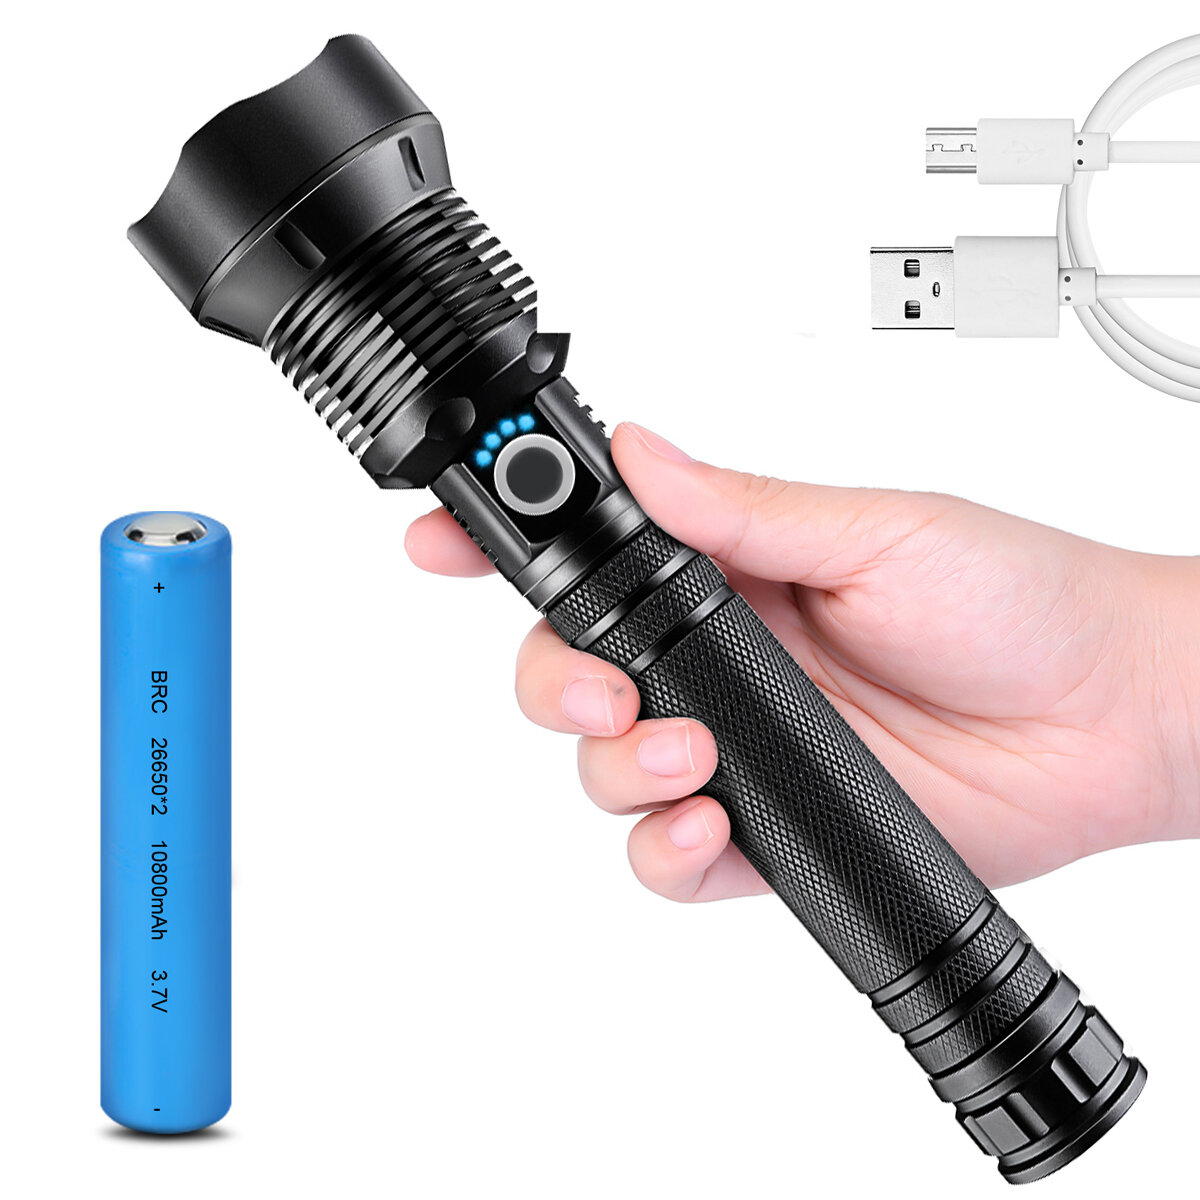 CHARMINER XPH90.2 USB Rechargeable Handheld Flashlight Kit with 18650 Battery USB Cable Adjustable Focus LED Torch